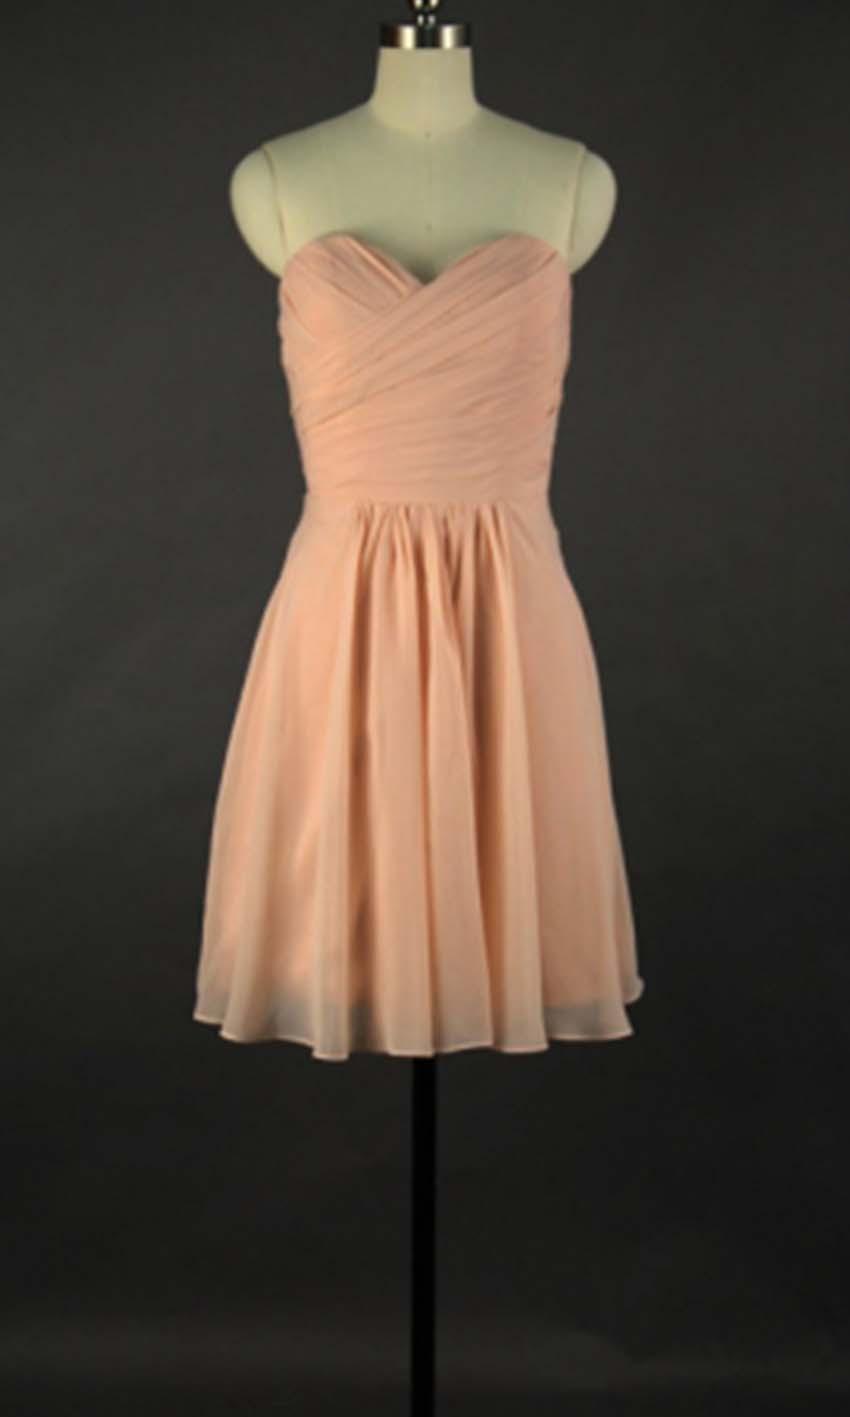 Wedding - Cute Peach Short Sweetheart Bridesmaid Dresses KSP314 [KSP314] - £79.00 : Cheap Prom Dresses Uk, Bridesmaid Dresses, 2014 Prom & Evening Dresses, Look for cheap elegant prom dresses 2014, cocktail gowns, or dresses for special occasions? kissprom.co.uk of